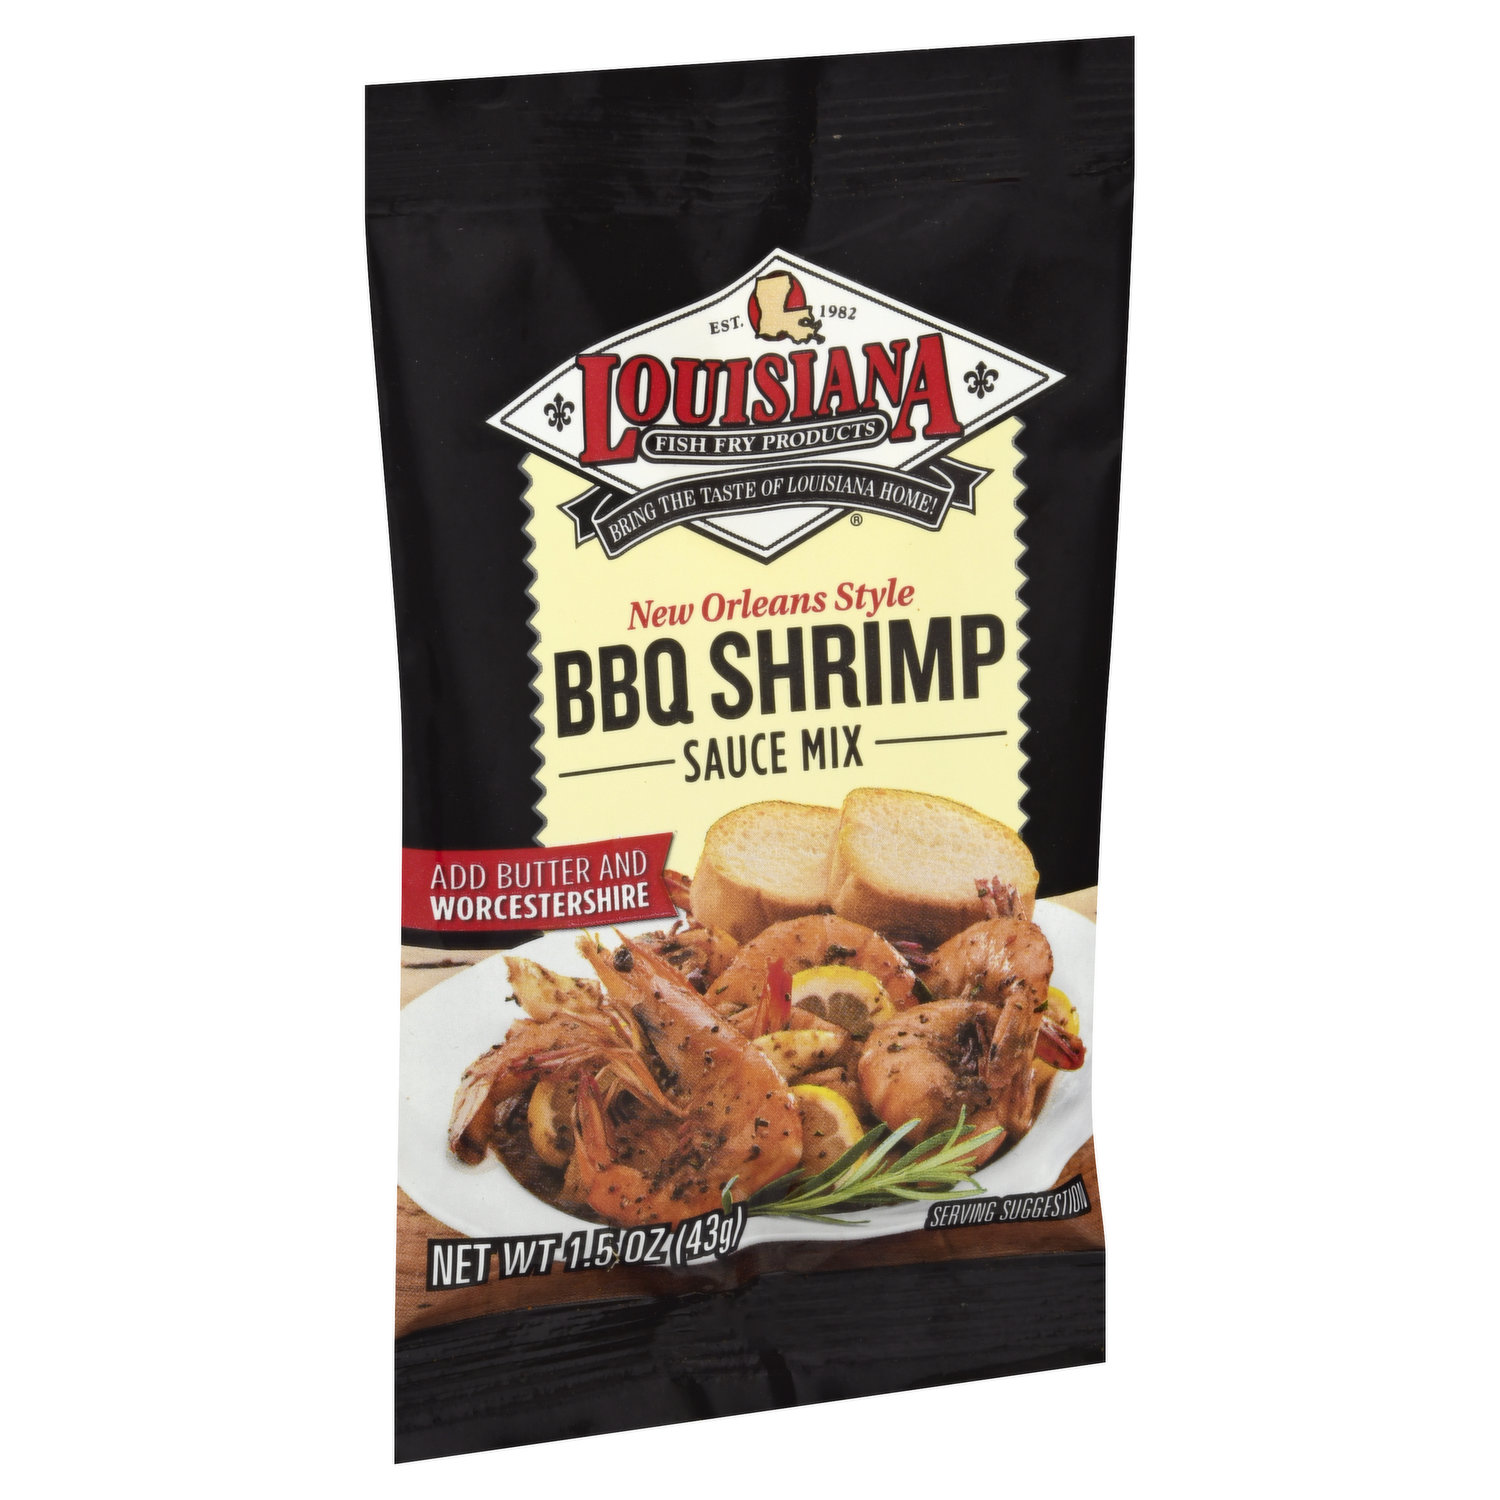 Louisiana Fish Fry Products Sauce Mix, BBQ Shrimp, New Orleans Style